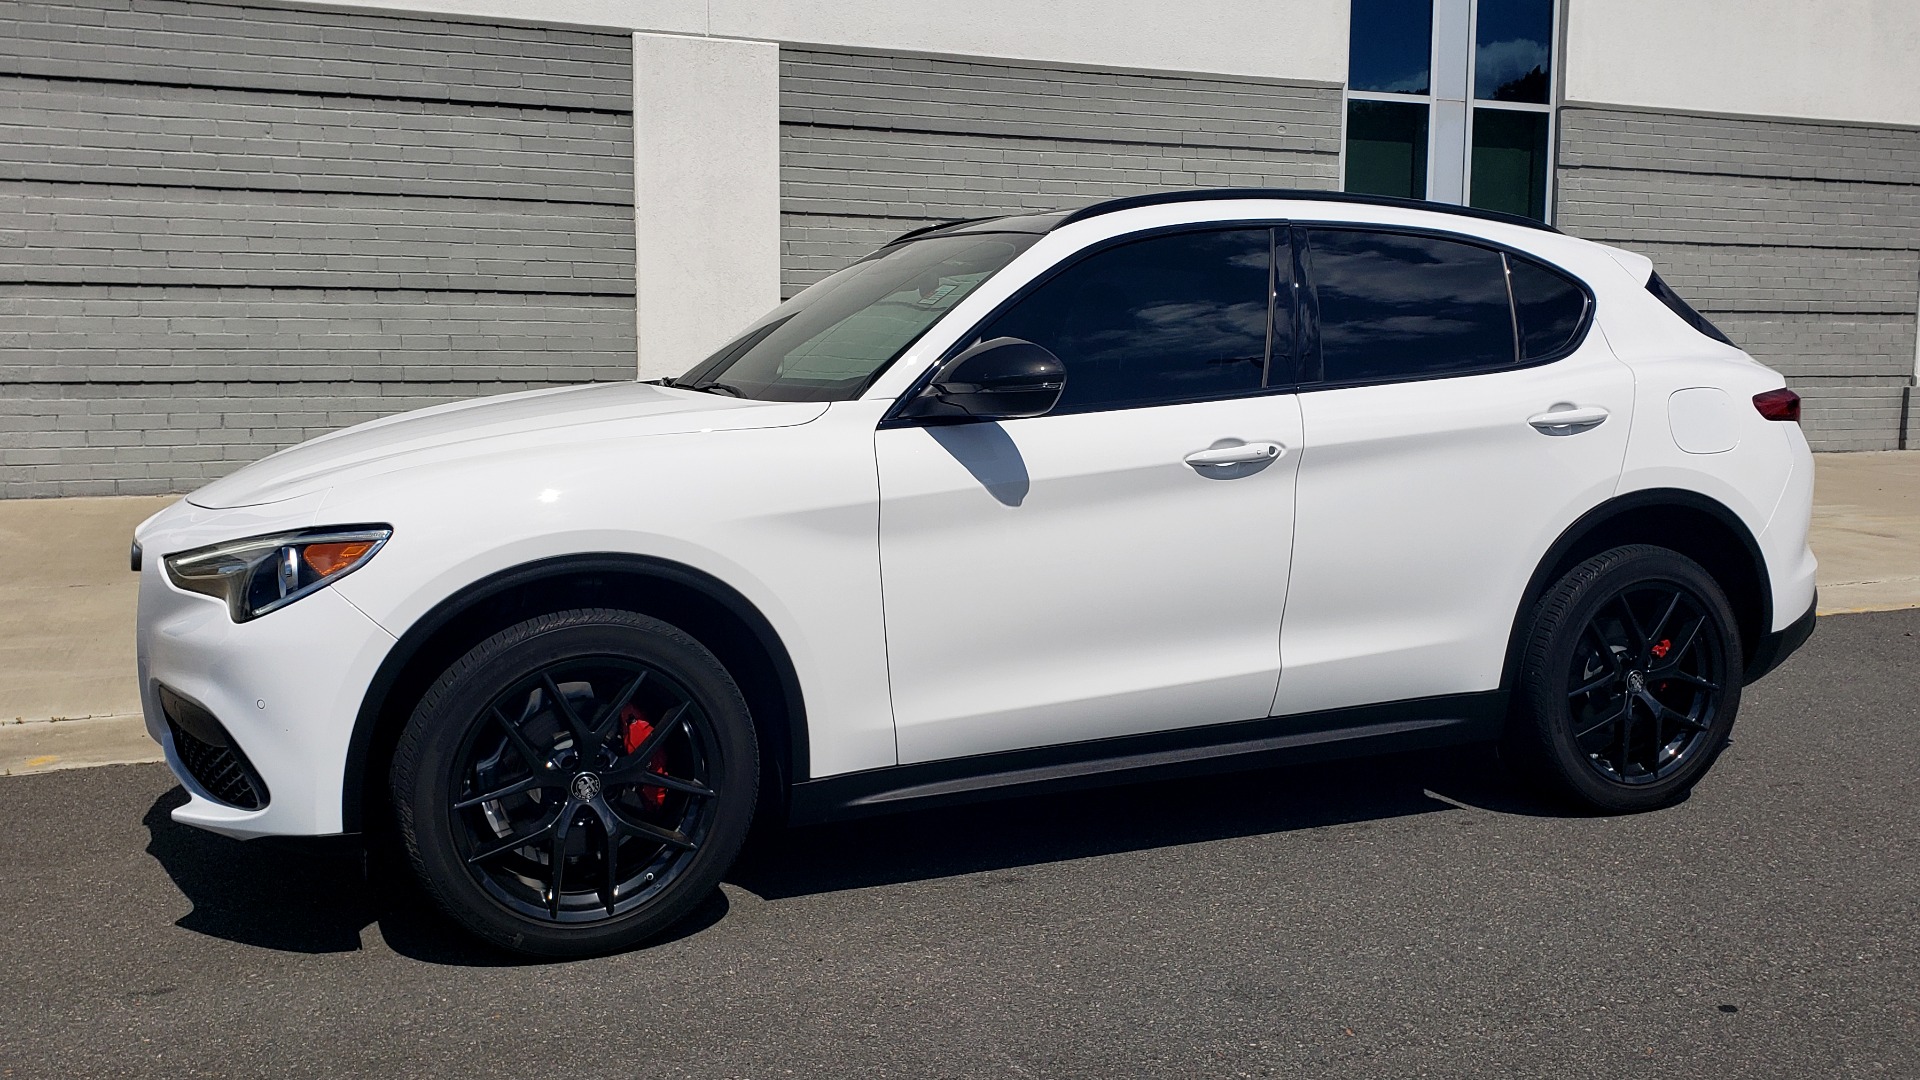 Used 2019 Alfa Romeo STELVIO TI SPORT AWD / 2.0L TURBO / 8-SPD AUTO / DRVR ASST / REARVIEW for sale Sold at Formula Imports in Charlotte NC 28227 7